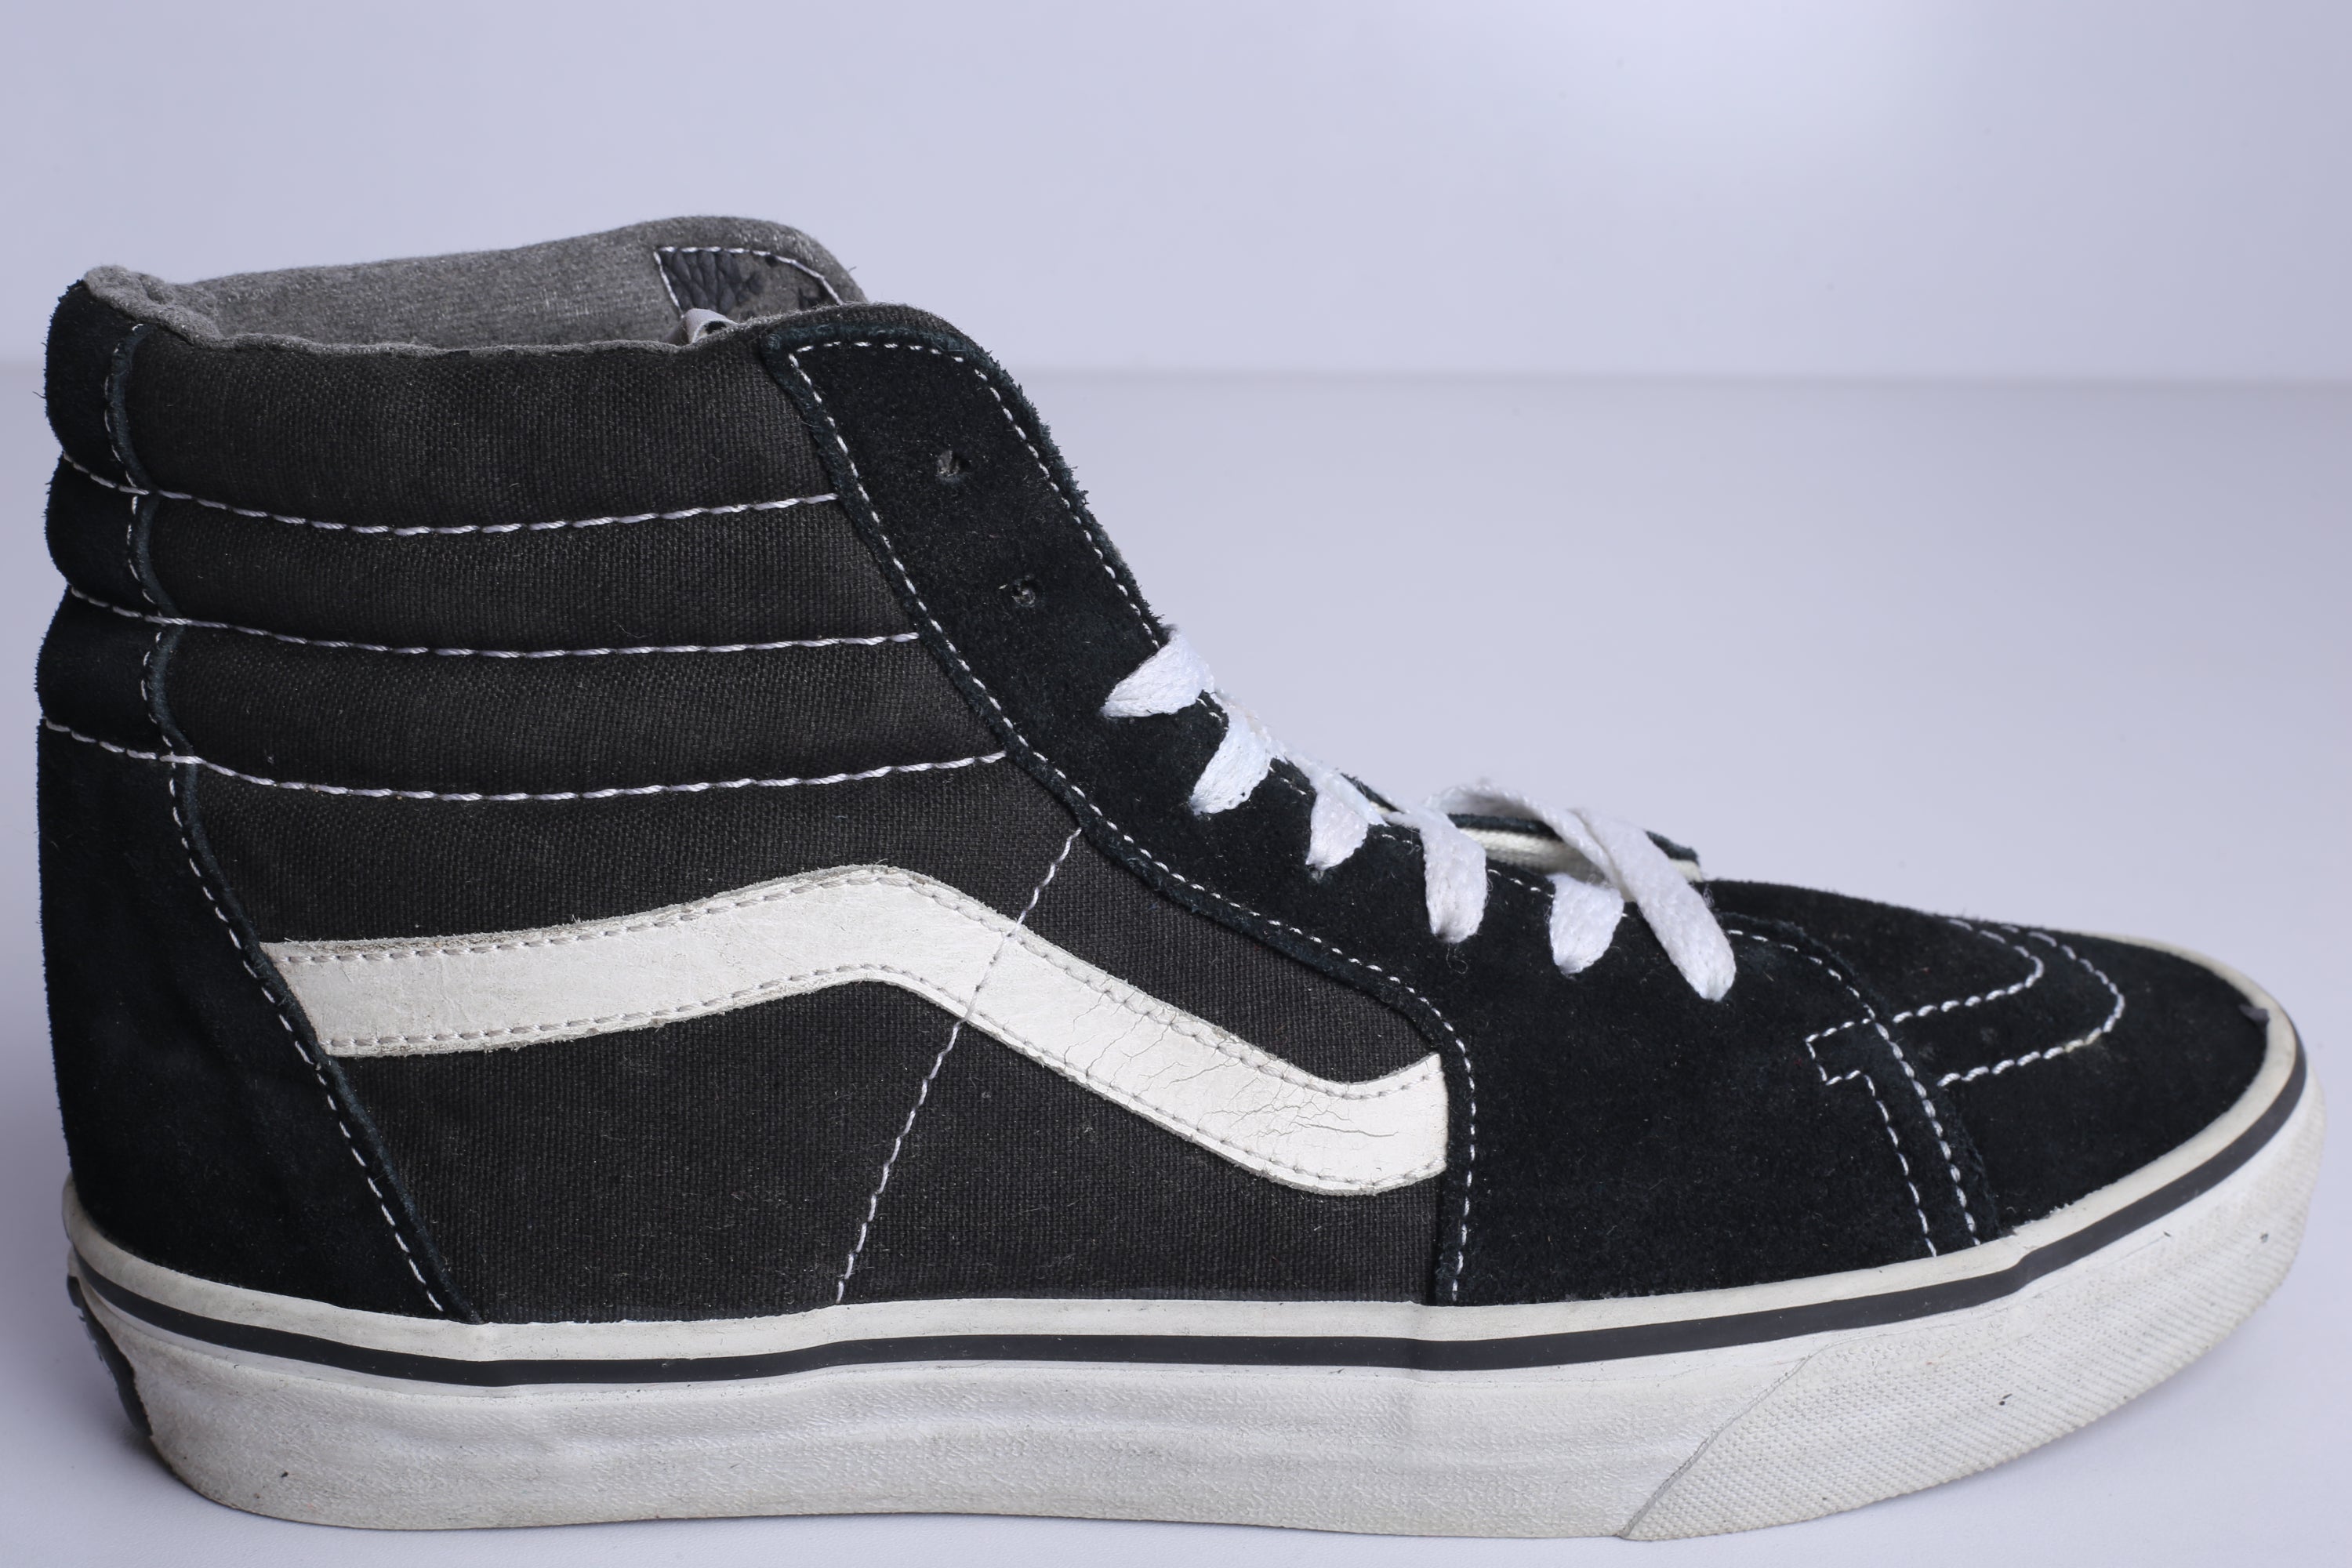 Vans Off the Wall Sk8 High Sneaker Black - (Condition Premium)